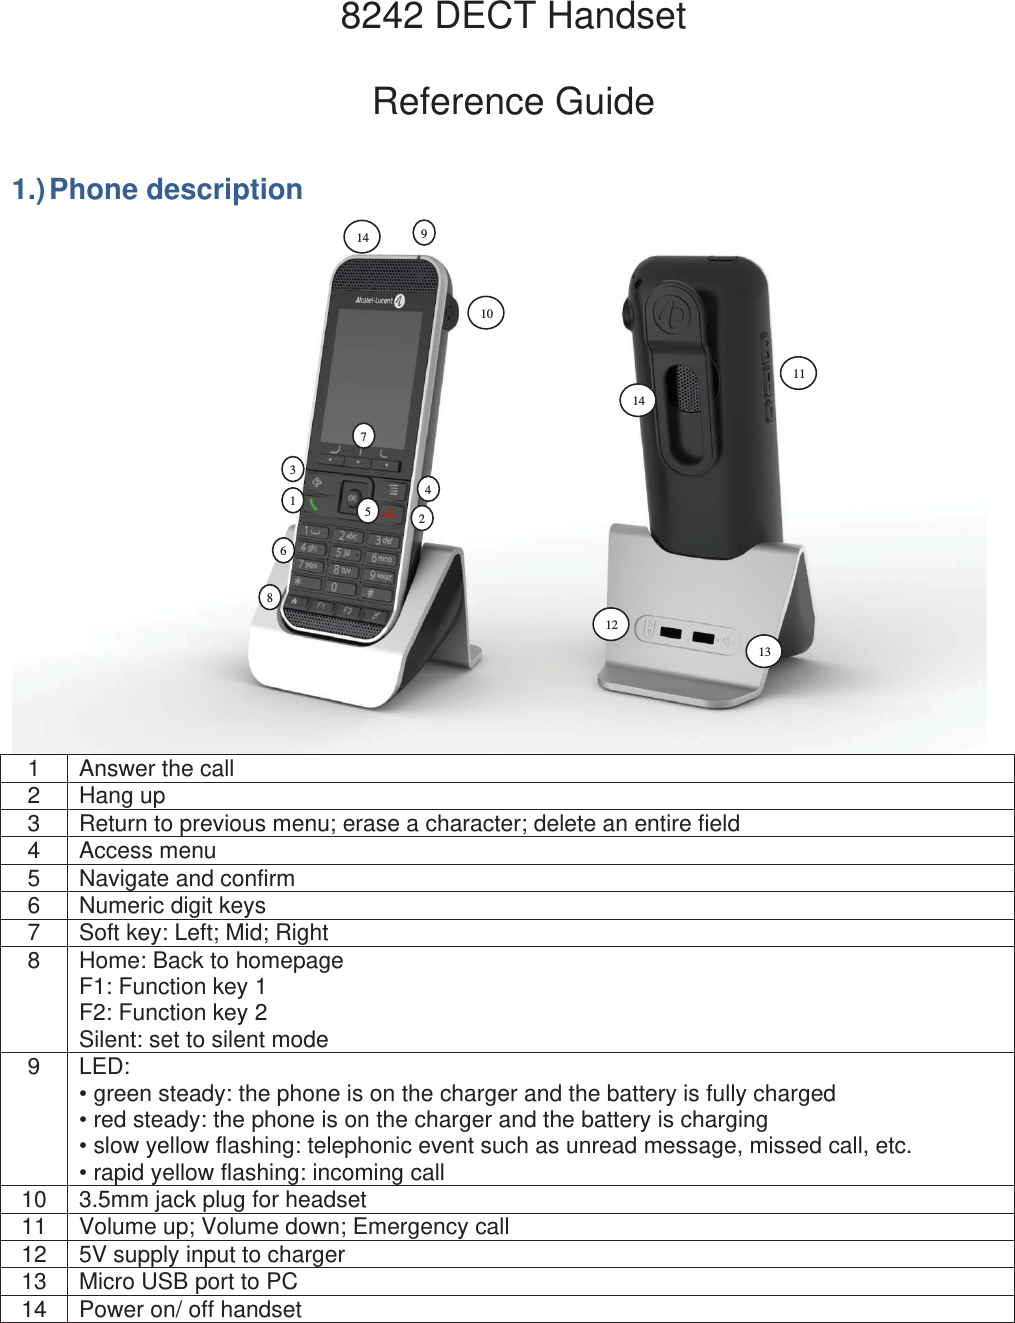 8242 DECT Handset  Reference Guide 1.) Phone description  1  Answer the call 2 Hang up 3  Return to previous menu; erase a character; delete an entire field 4 Access menu 5  Navigate and confirm 6  Numeric digit keys 7  Soft key: Left; Mid; Right 8  Home: Back to homepage F1: Function key 1 F2: Function key 2 Silent: set to silent mode 9 LED: • green steady: the phone is on the charger and the battery is fully charged • red steady: the phone is on the charger and the battery is charging • slow yellow flashing: telephonic event such as unread message, missed call, etc. • rapid yellow flashing: incoming call 10  3.5mm jack plug for headset 11  Volume up; Volume down; Emergency call 12  5V supply input to charger 13  Micro USB port to PC 14  Power on/ off handset 1 23 45 96 7 8 11  10  12  13  14  14 